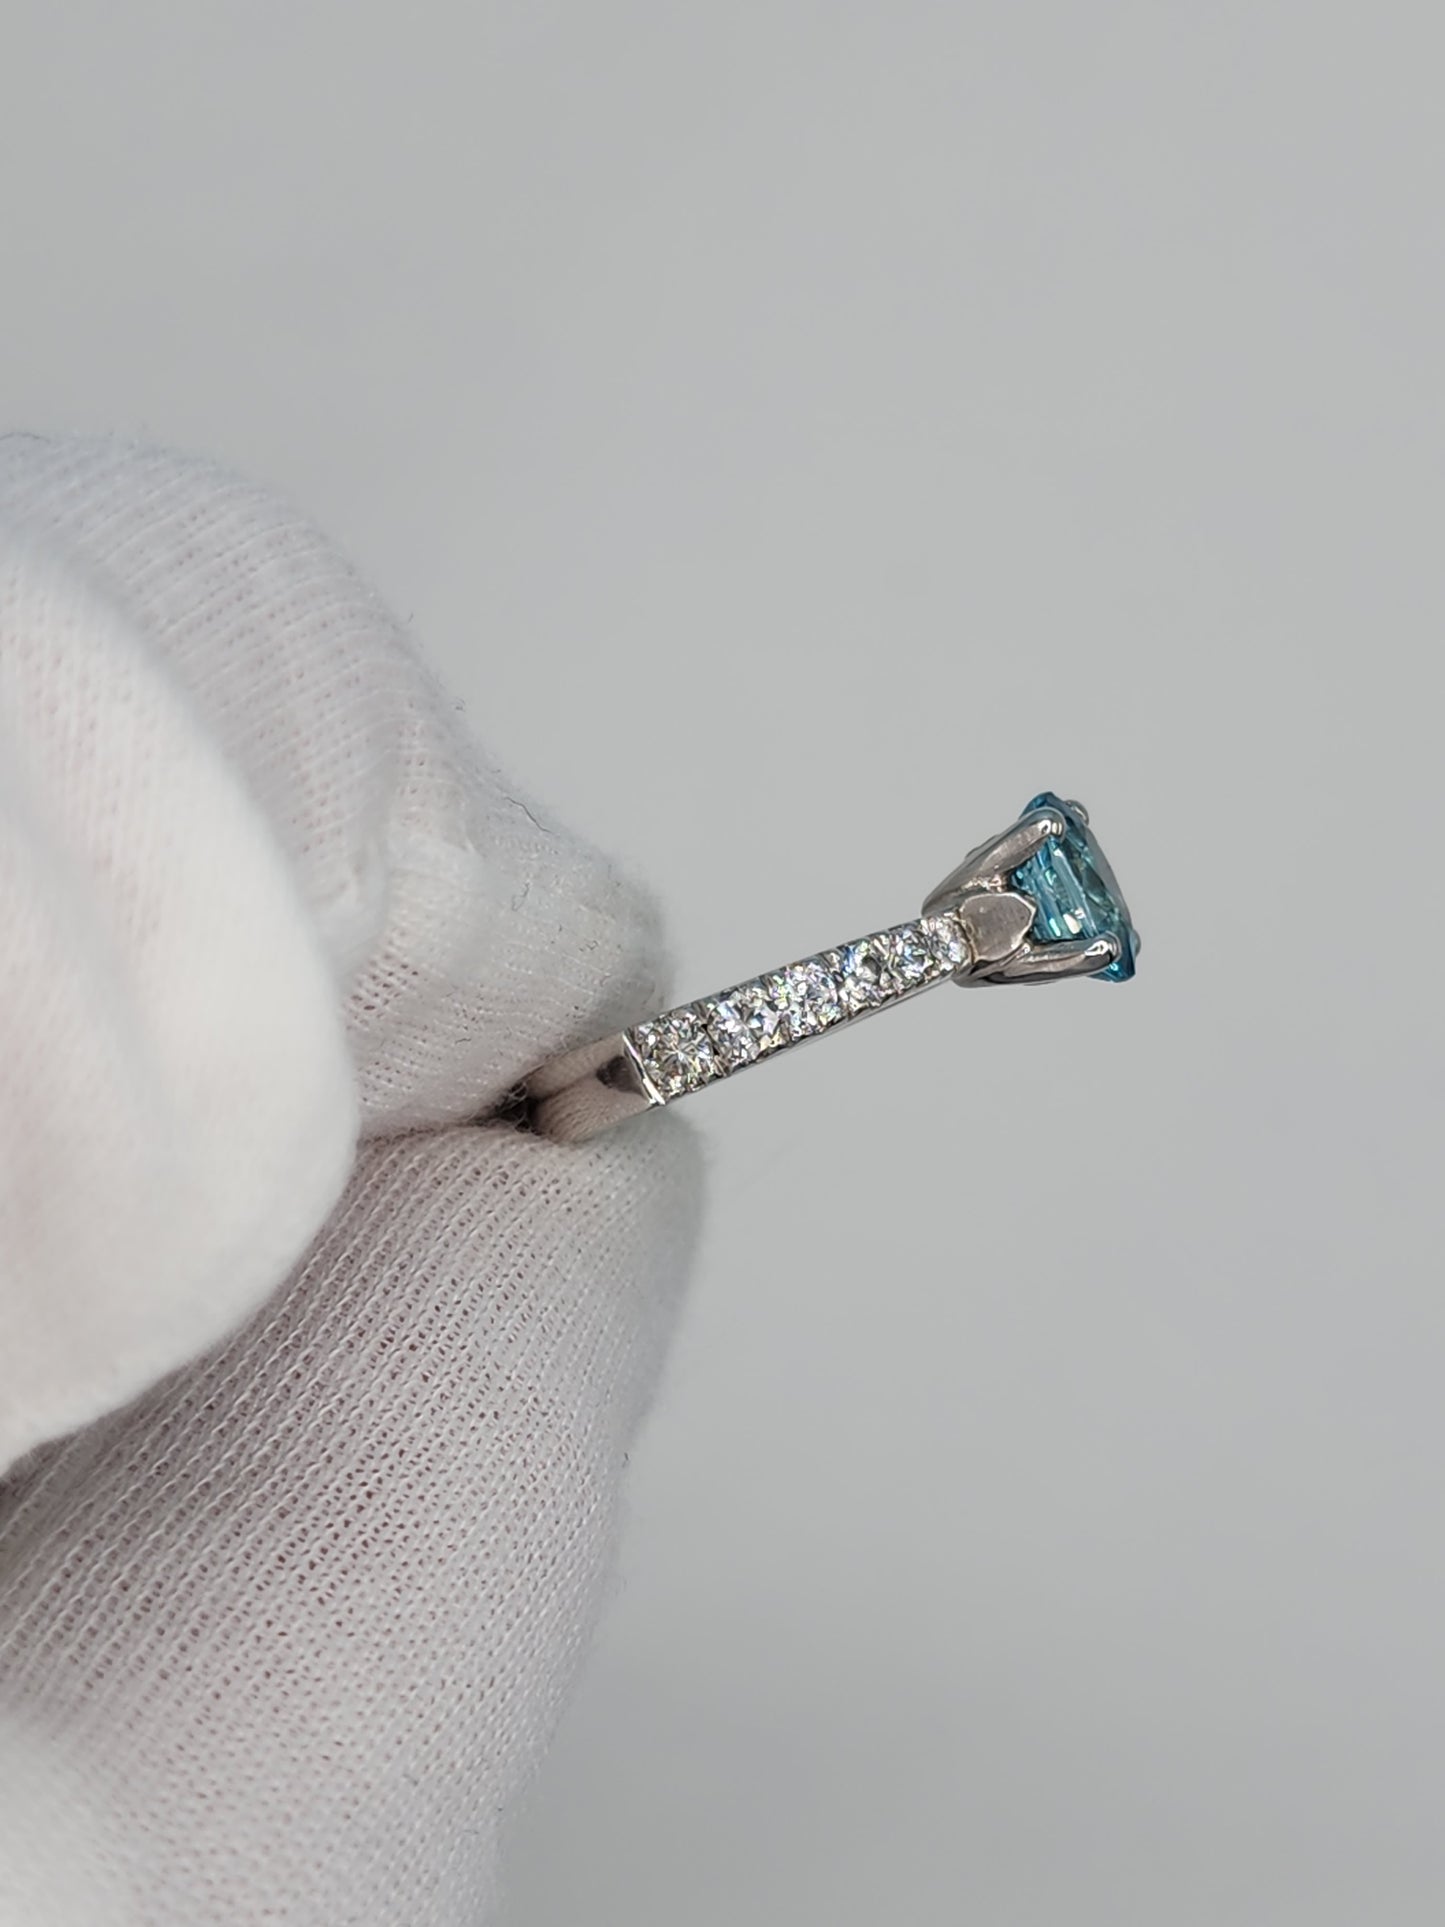 Natural 2.24 ct Blue Zircon and Diamond Ring in 14k White Gold